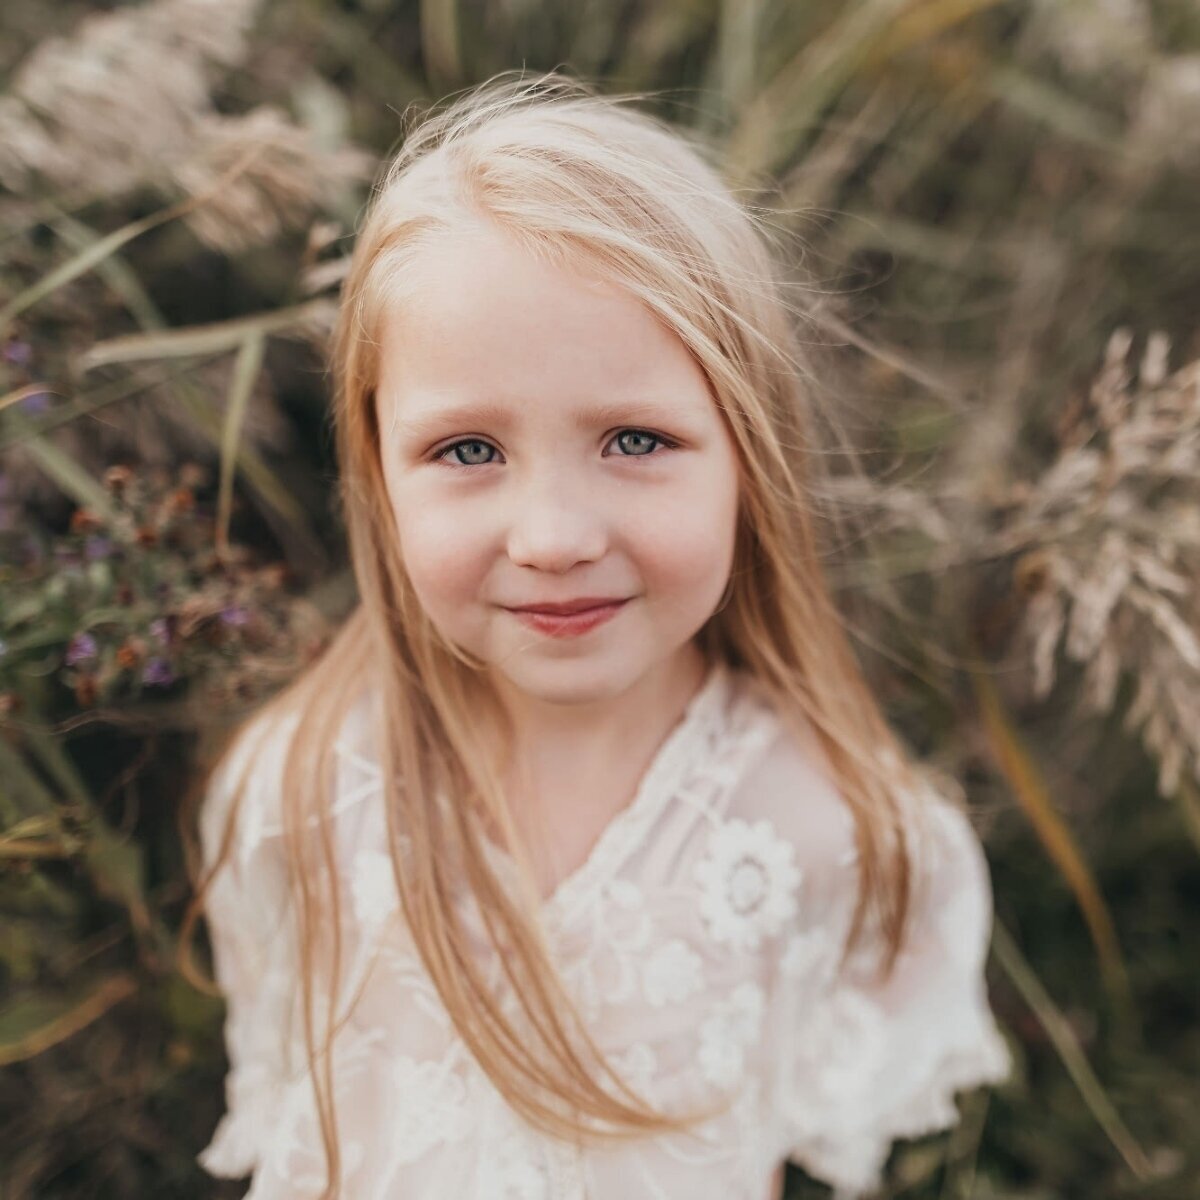 sweet young smiling girl looking at the camera